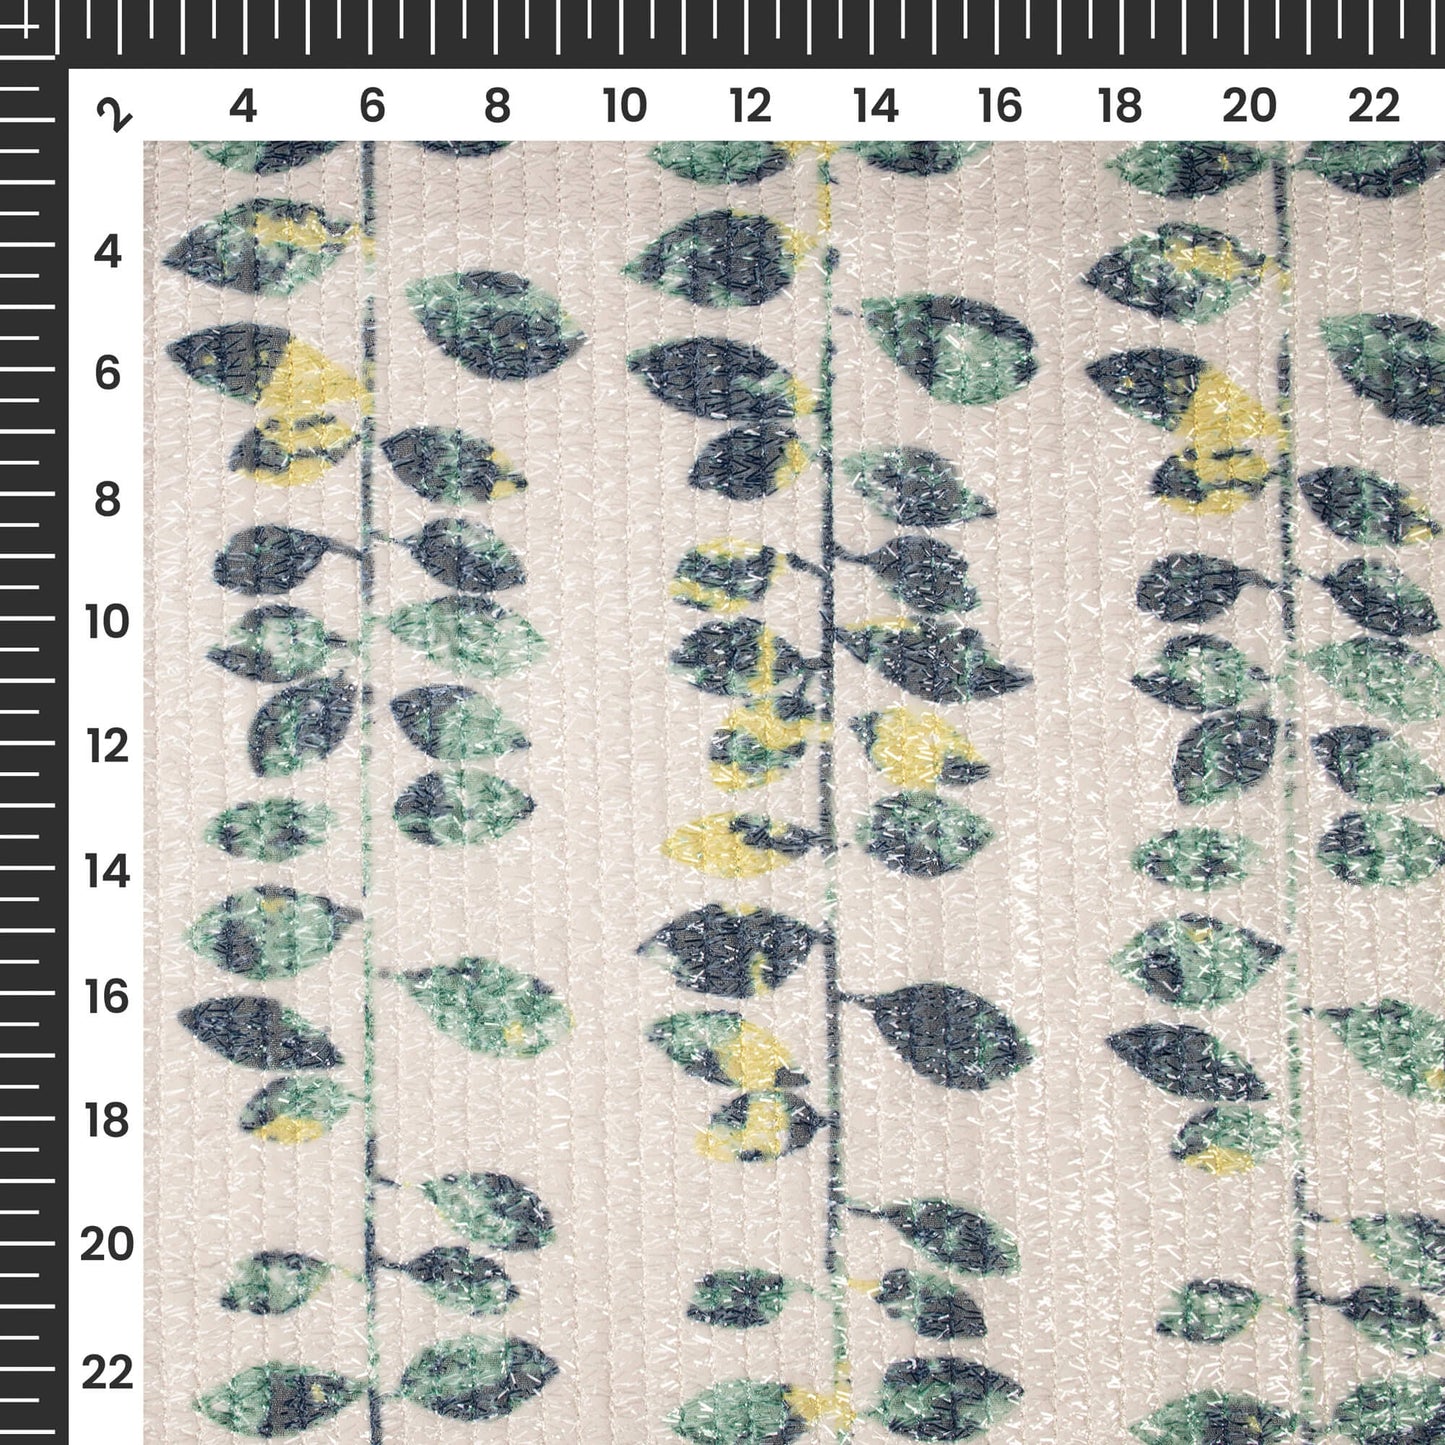 Exclusive Leafage Digital Print Stripes Shimmer Embroidery Georgette Fabric